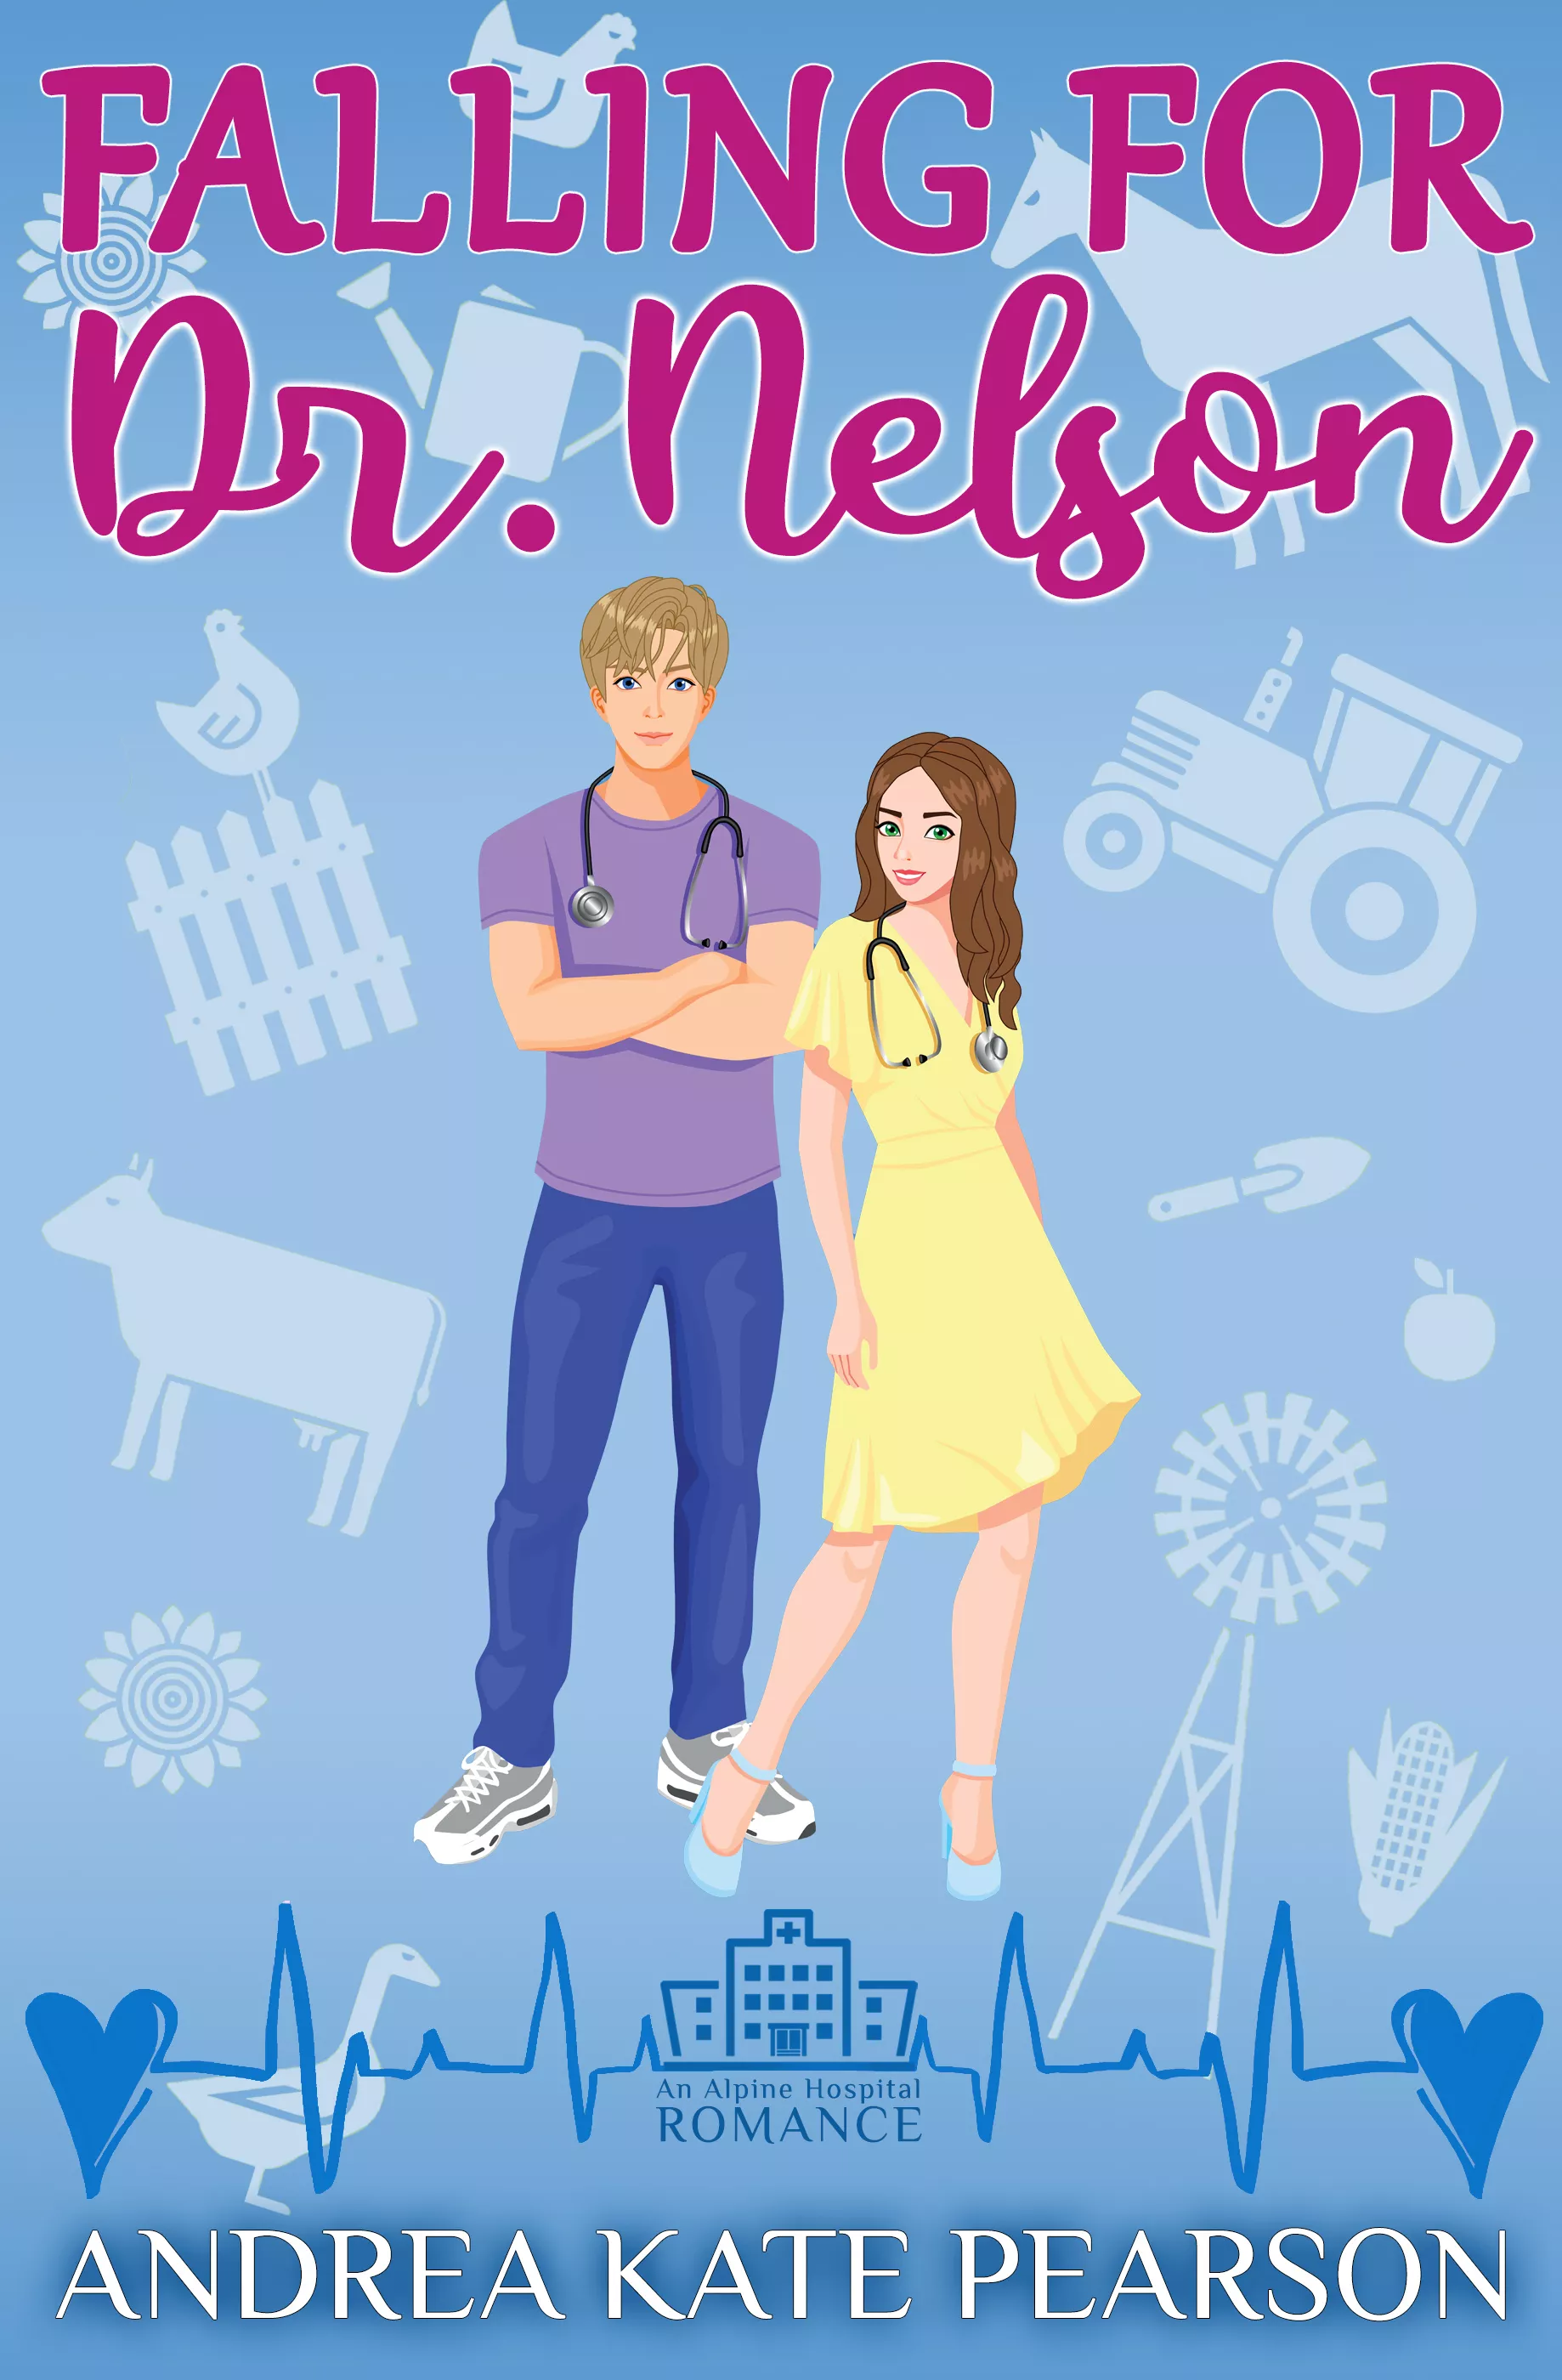 Falling for Dr. Nelson